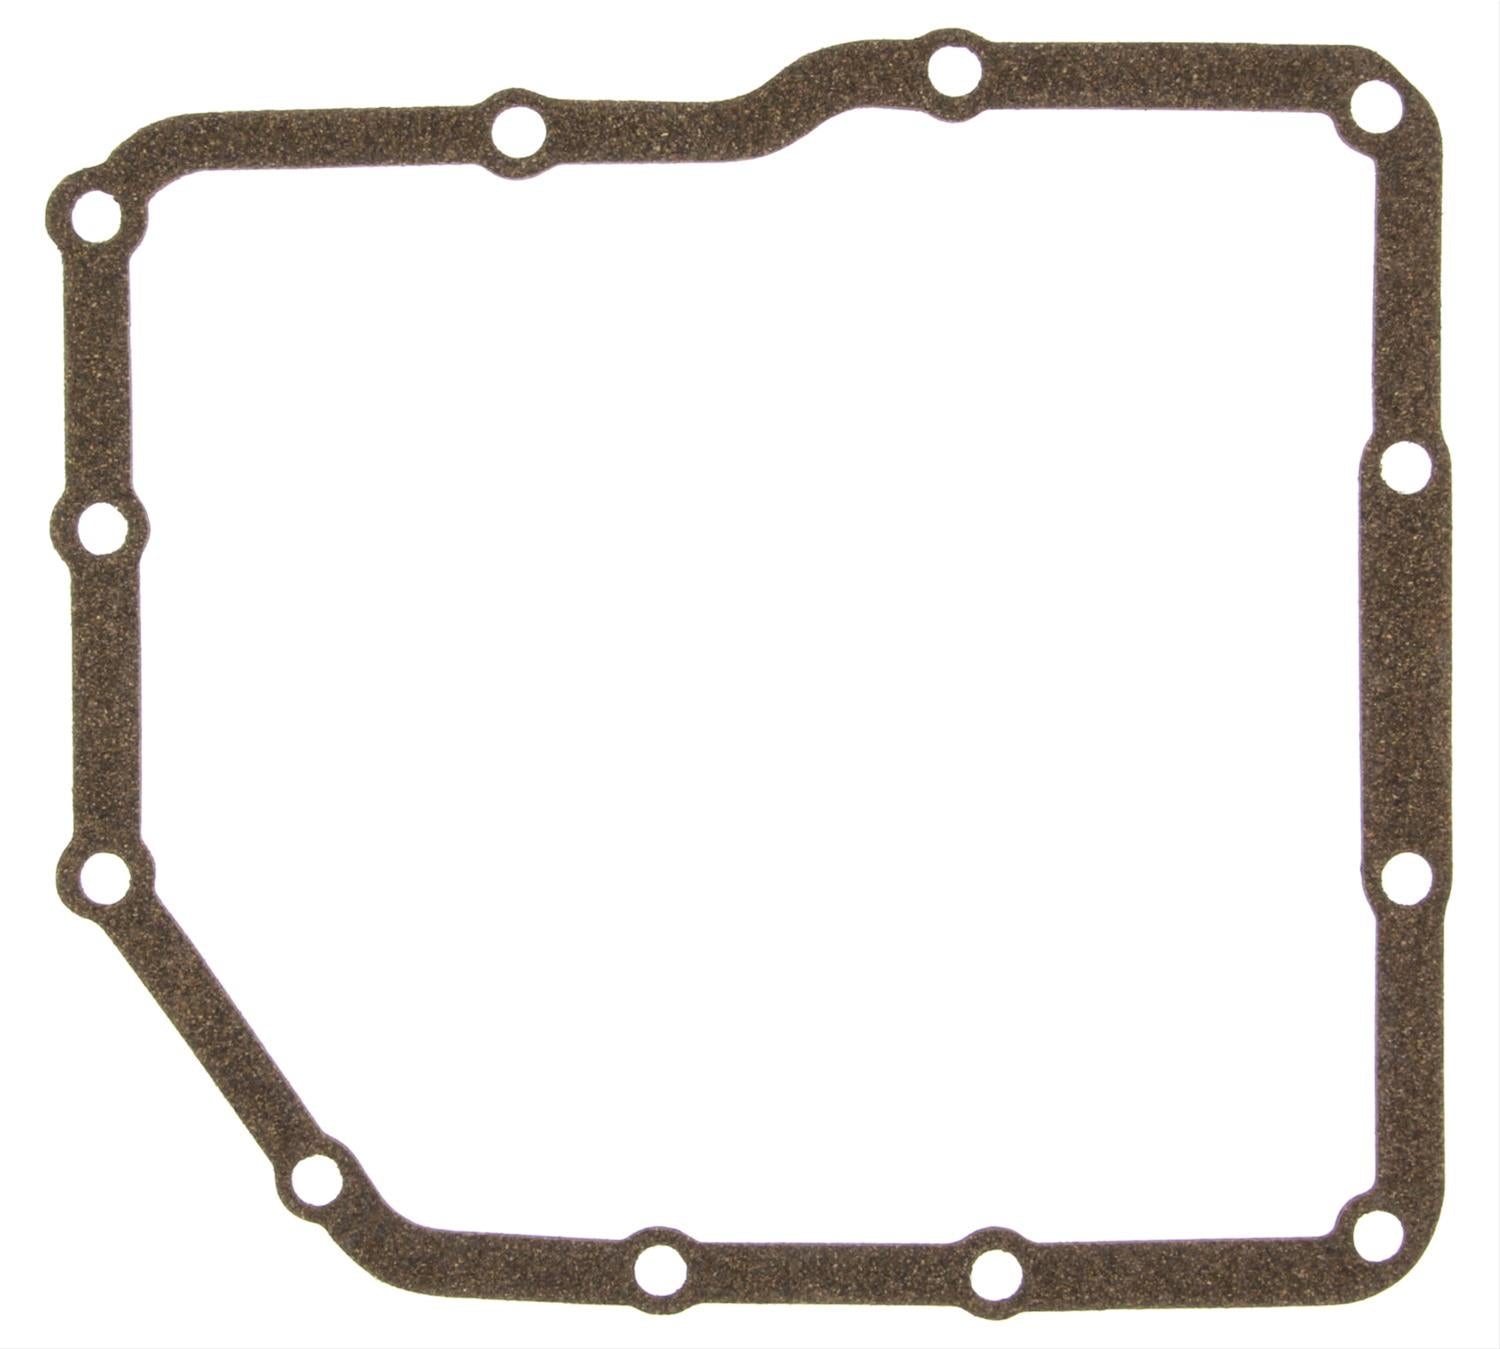 MAHLE Automatic Transmission Valve Body Cover Gasket W39111